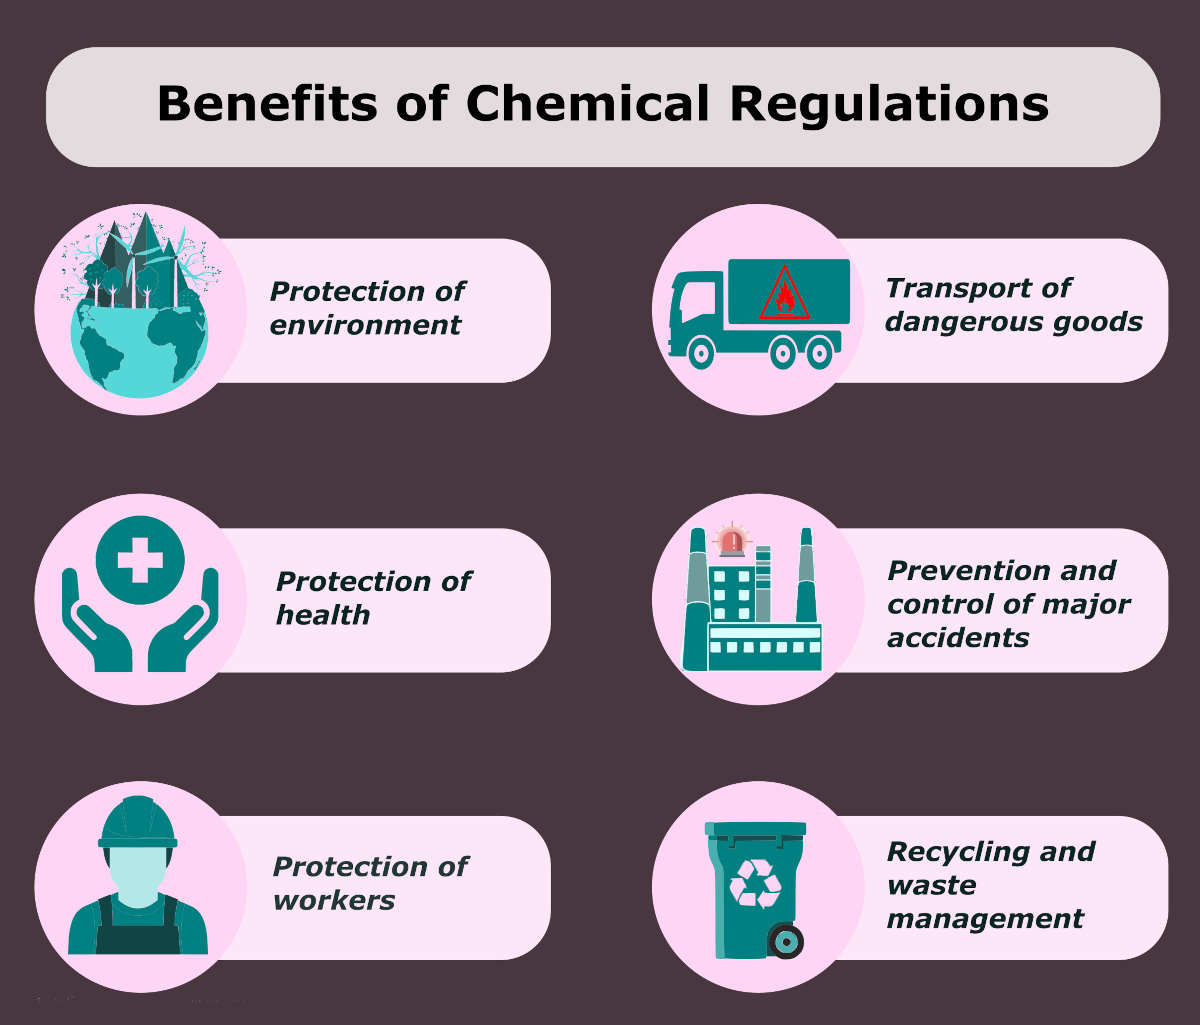 Benefits of chemical regulations